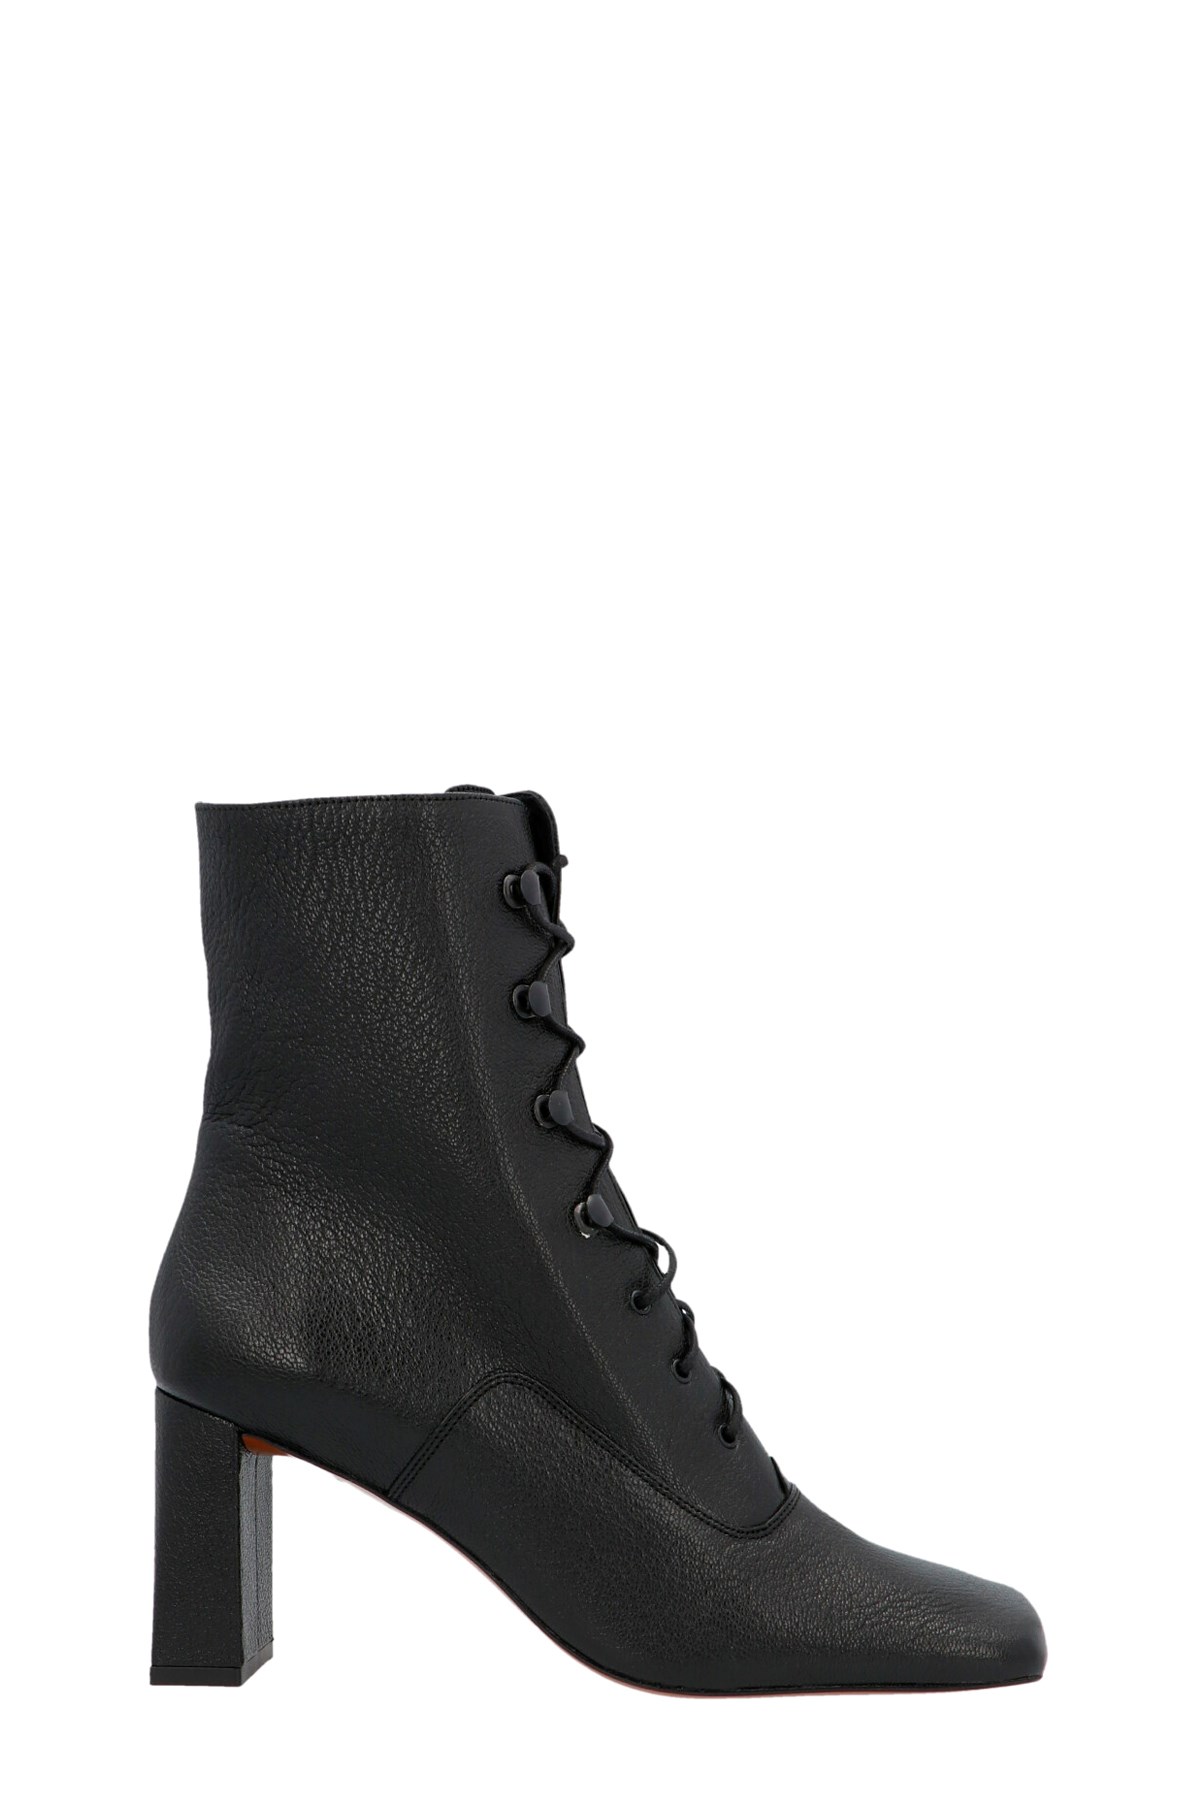 BY FAR 'Claude' Ankle Boots